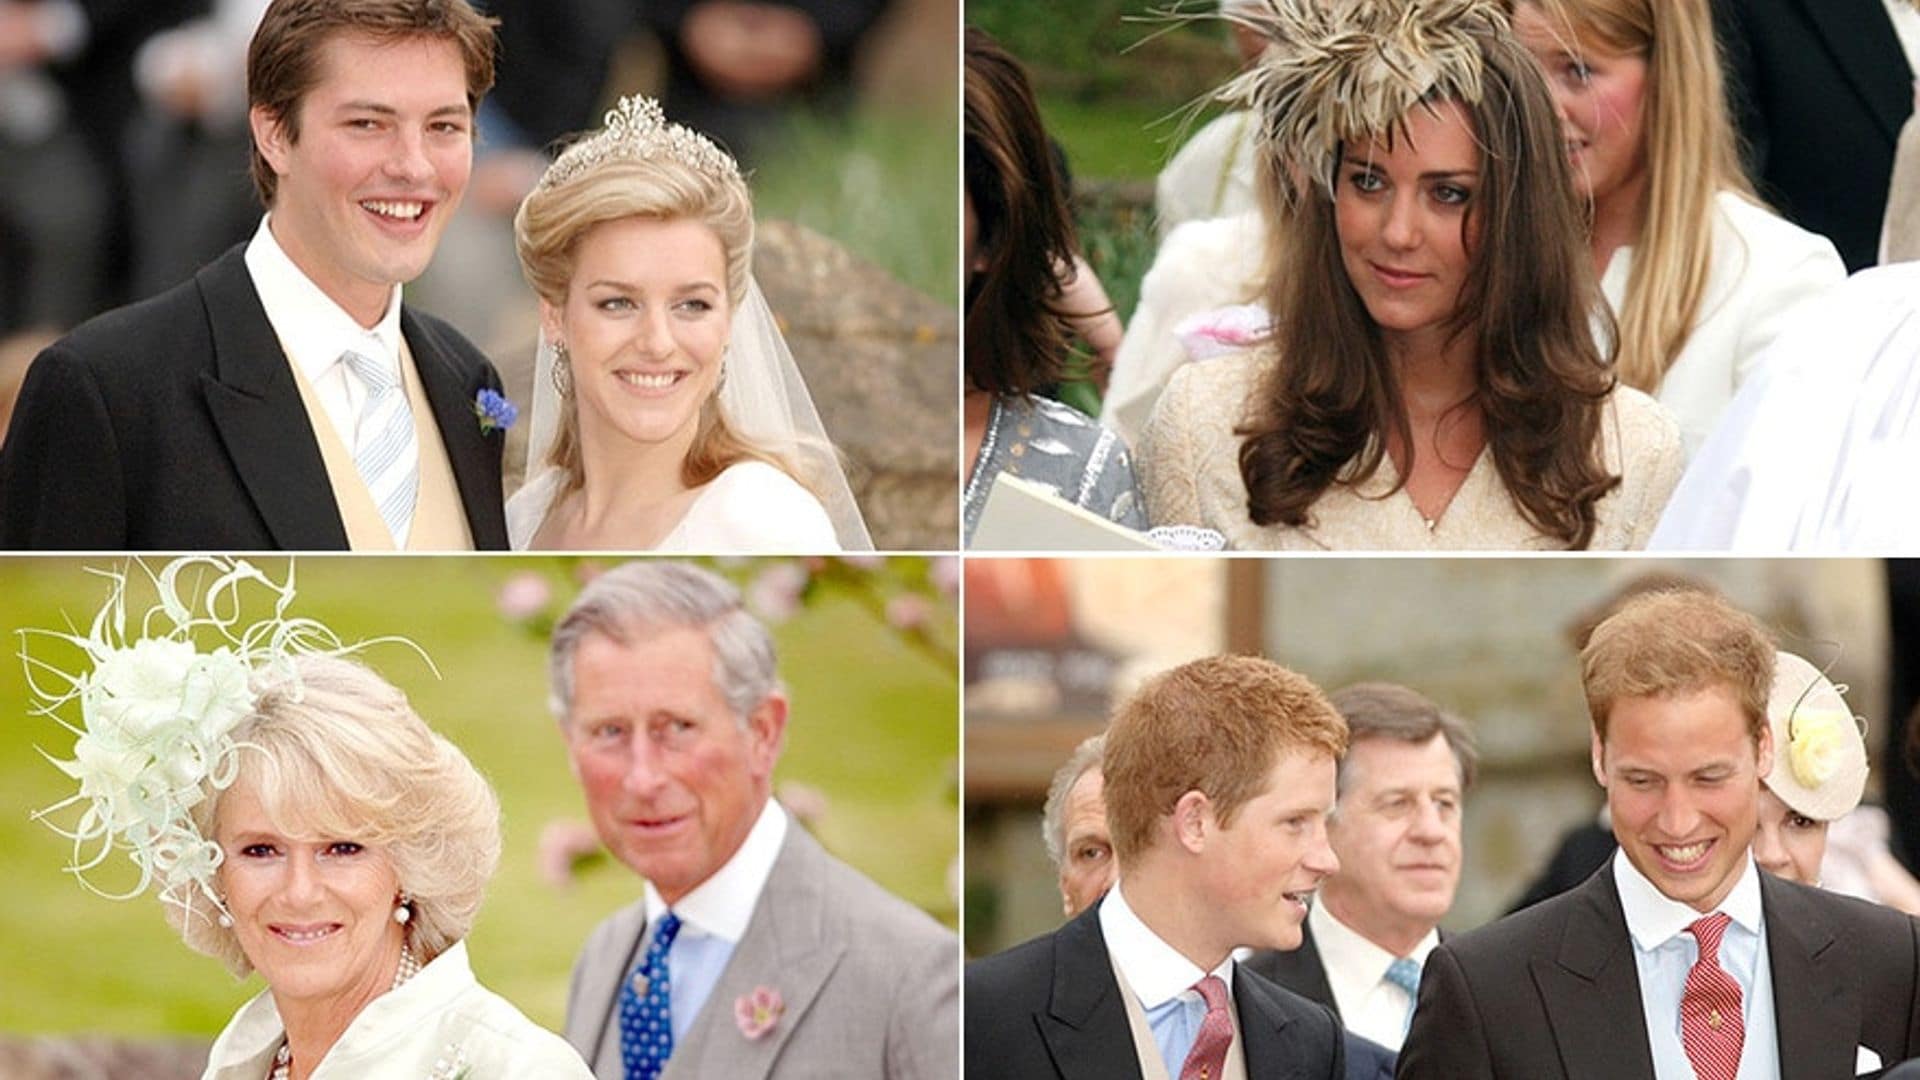 It may have not been officially a 'royal' wedding, but when <a href="https://us.hellomagazine.com/tags/1/duchess-of-cornwall/"><strong>Camilla, Duchess of Cornwall</strong></a>'s daughter Laura Parker Bowles walked down the aisle with aristocrat Harry Lopes on May 6, 2006 at St Cyriac's Church, in Wiltshire, England, the nuptials were every bit the fairytale. Like <a href="https://us.hellomagazine.com/weddings/12017052022644/pippa-middleton-james-matthews-wedding-arrivals-highlights/"><strong>Pippa Middleton in her own gorgeous 2017 wedding</strong></a>, Laura looked like a true princess bride for the idyllic country affair. And the couple's guest list boasted seriously royal credentials, attended by Princess Margaret's daughter Lady Sarah Chatto, <a href="https://us.hellomagazine.com/tags/1/prince-charles/"><strong>Prince Charles</strong></a>, <a href="https://us.hellomagazine.com/tags/1/prince-harry/"><strong>Prince Harry</strong></a> and last but not least <a href="https://us.hellomagazine.com/tags/1/prince-william/"><strong>Prince William</strong></a>, who was marking one of his early public appearances with then-girlfriend <a href="https://us.hellomagazine.com/tags/1/kate-middleton/"><strong>Kate Middleton</strong></a>.
Harry a 29-year-old former Calvin Klein model turned accountant and Laura, a 27-year-old art gallery manager, saw their big day draw a crowd of 2,000 outside 16th-century St Cyriac's in the tiny village of Lacock. The joy was clear as Laura wed her boyfriend of eight years, with guests and wellwishers cheering the newlyweds as they emerged as husband and wife.
Scroll through to see all the best photos of Harry and Laura's charming English country wedding.